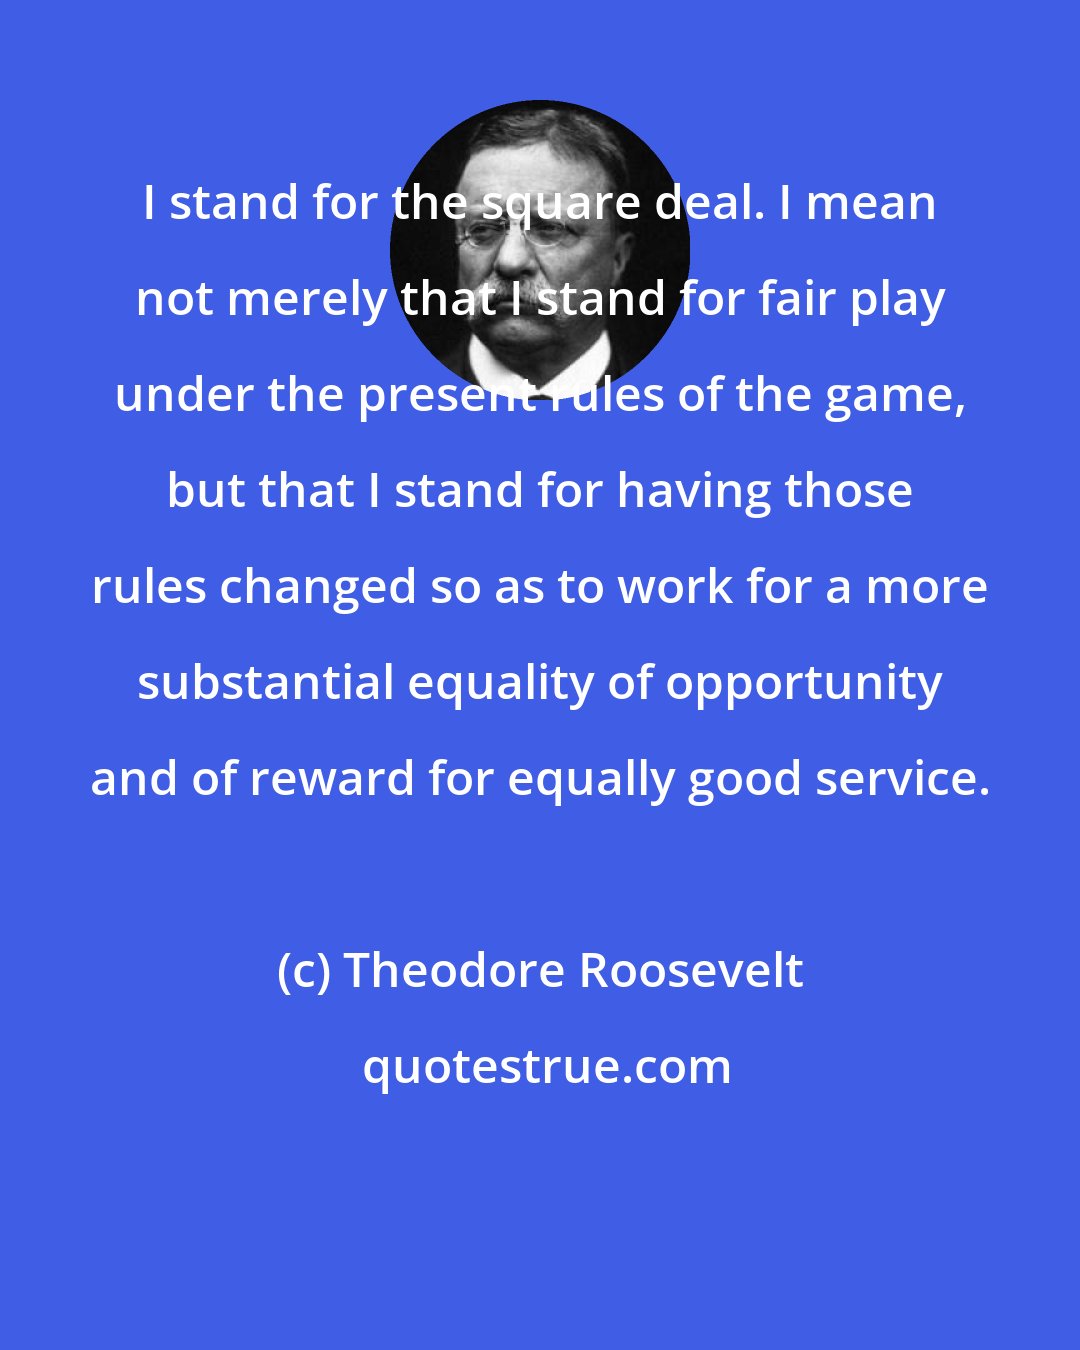 Theodore Roosevelt: I stand for the square deal. I mean not merely that I stand for fair play under the present rules of the game, but that I stand for having those rules changed so as to work for a more substantial equality of opportunity and of reward for equally good service.